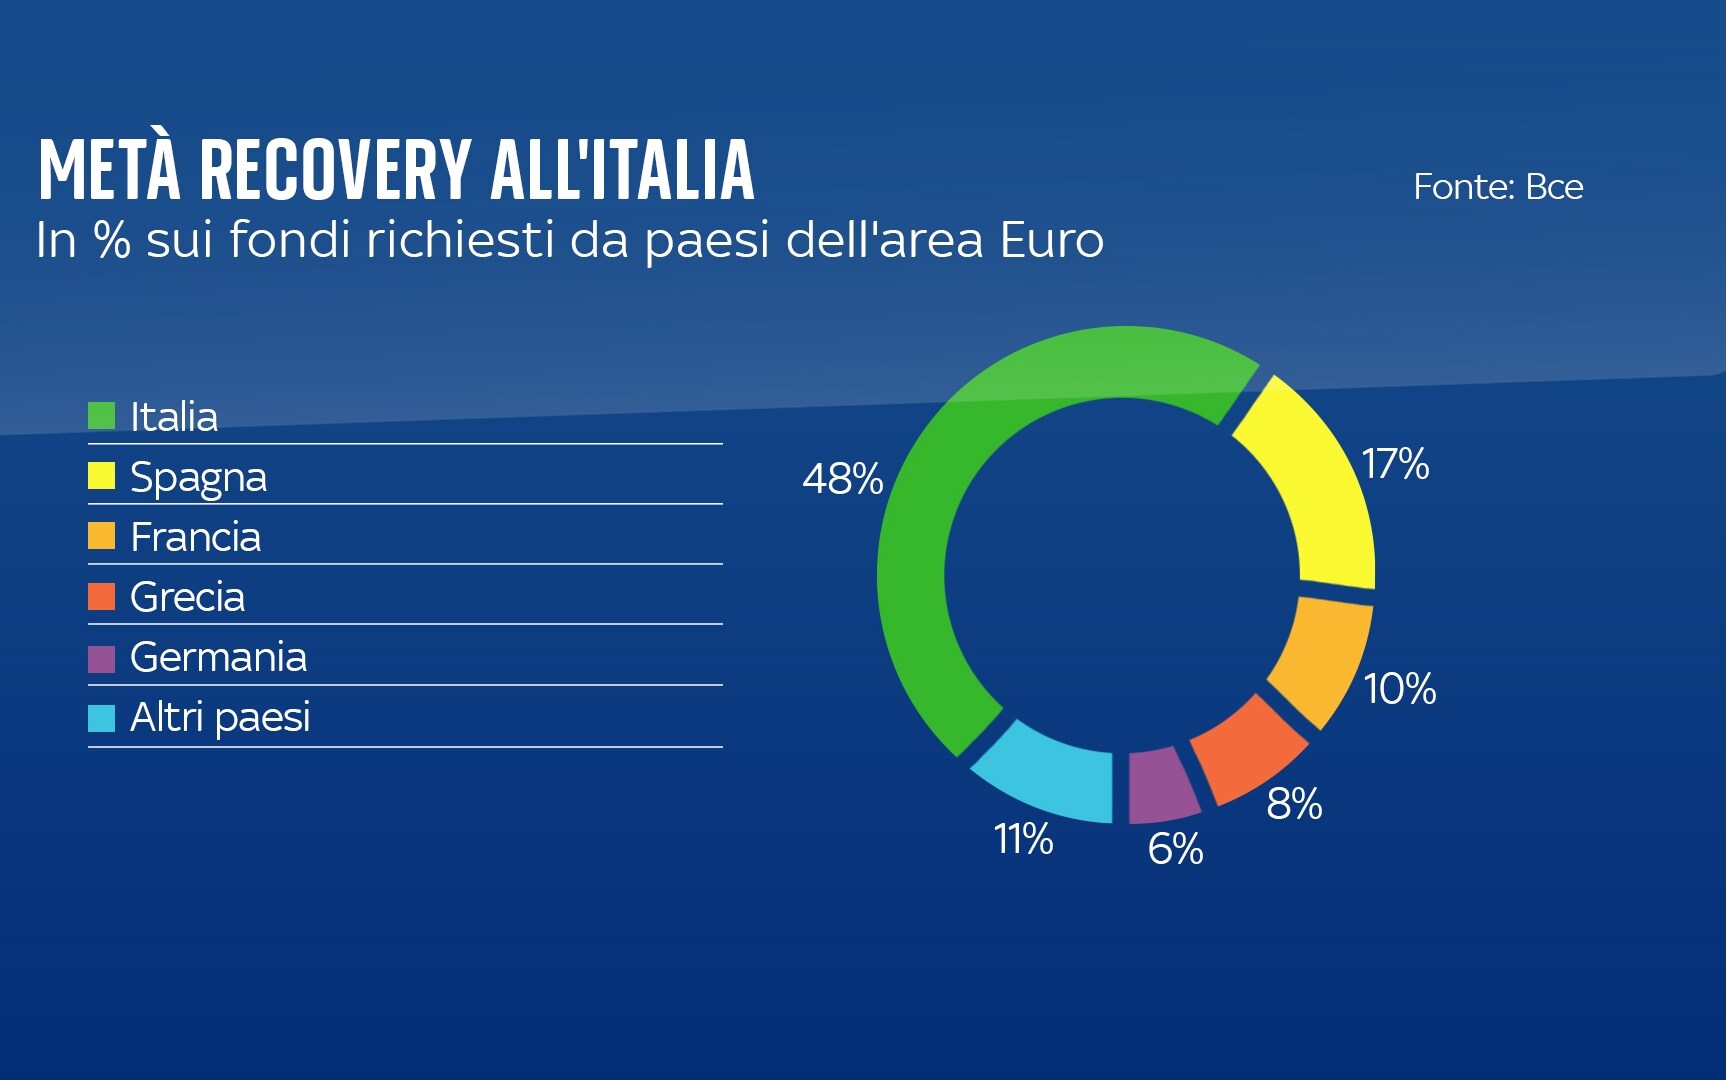 Recovery, among the euro area countries half of the funds will go to Italy (for now)